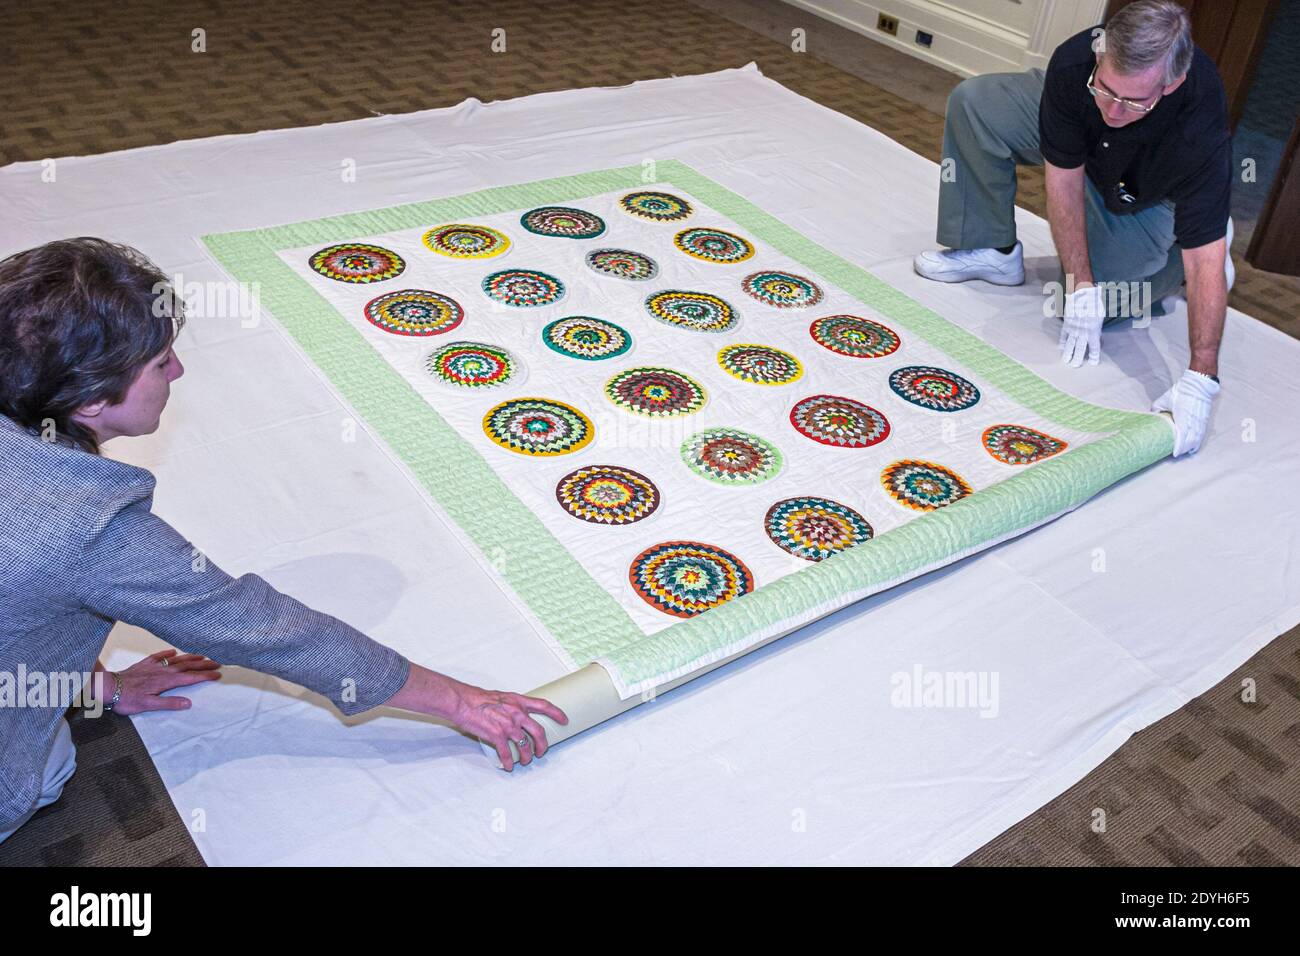 Alabama Montgomery state Department of Archives & History, Pine Burr state Quilt Archivistorians unwrapping, Foto Stock